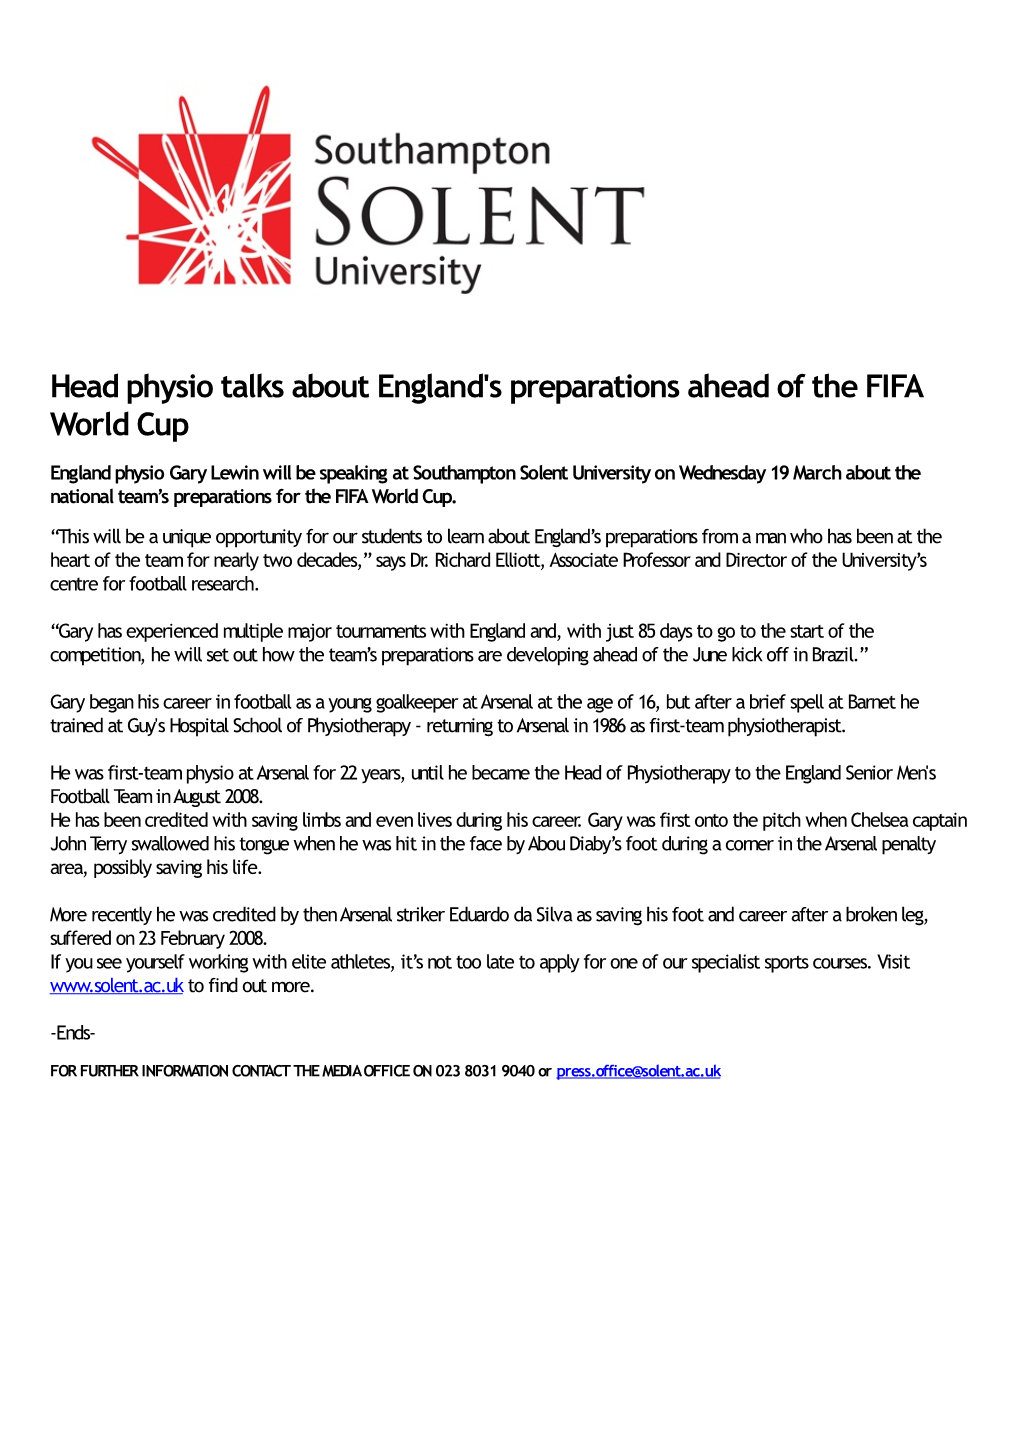 Head Physio Talks About England's Preparations Ahead of the FIFA